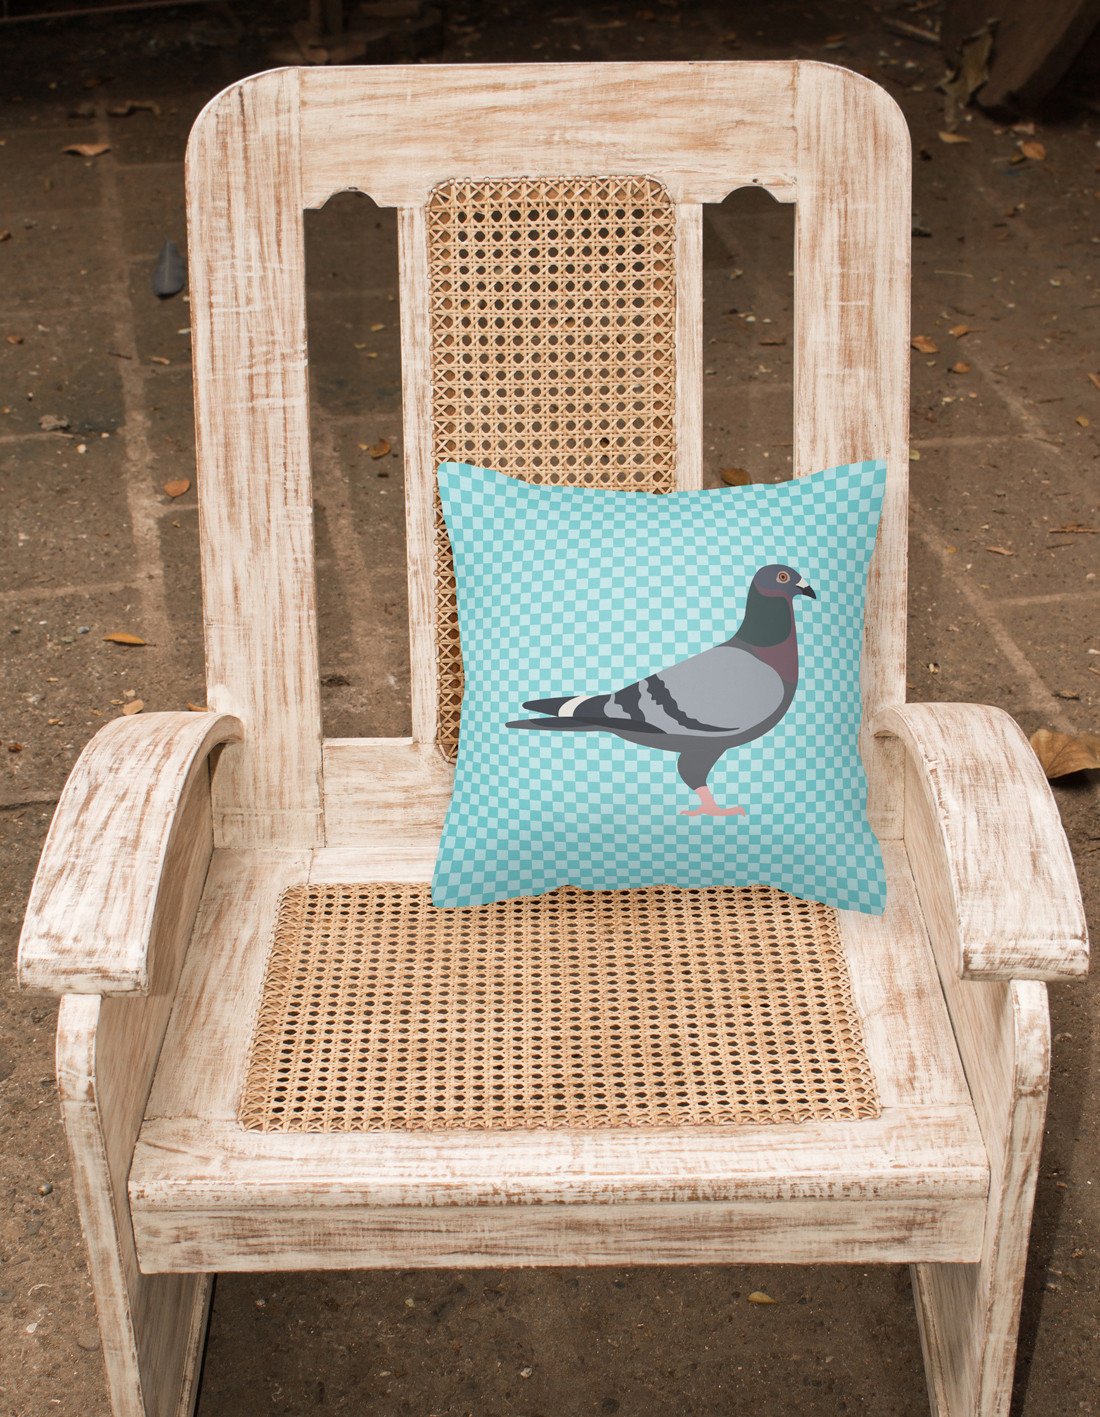 Racing Pigeon Blue Check Fabric Decorative Pillow BB8125PW1818 by Caroline's Treasures